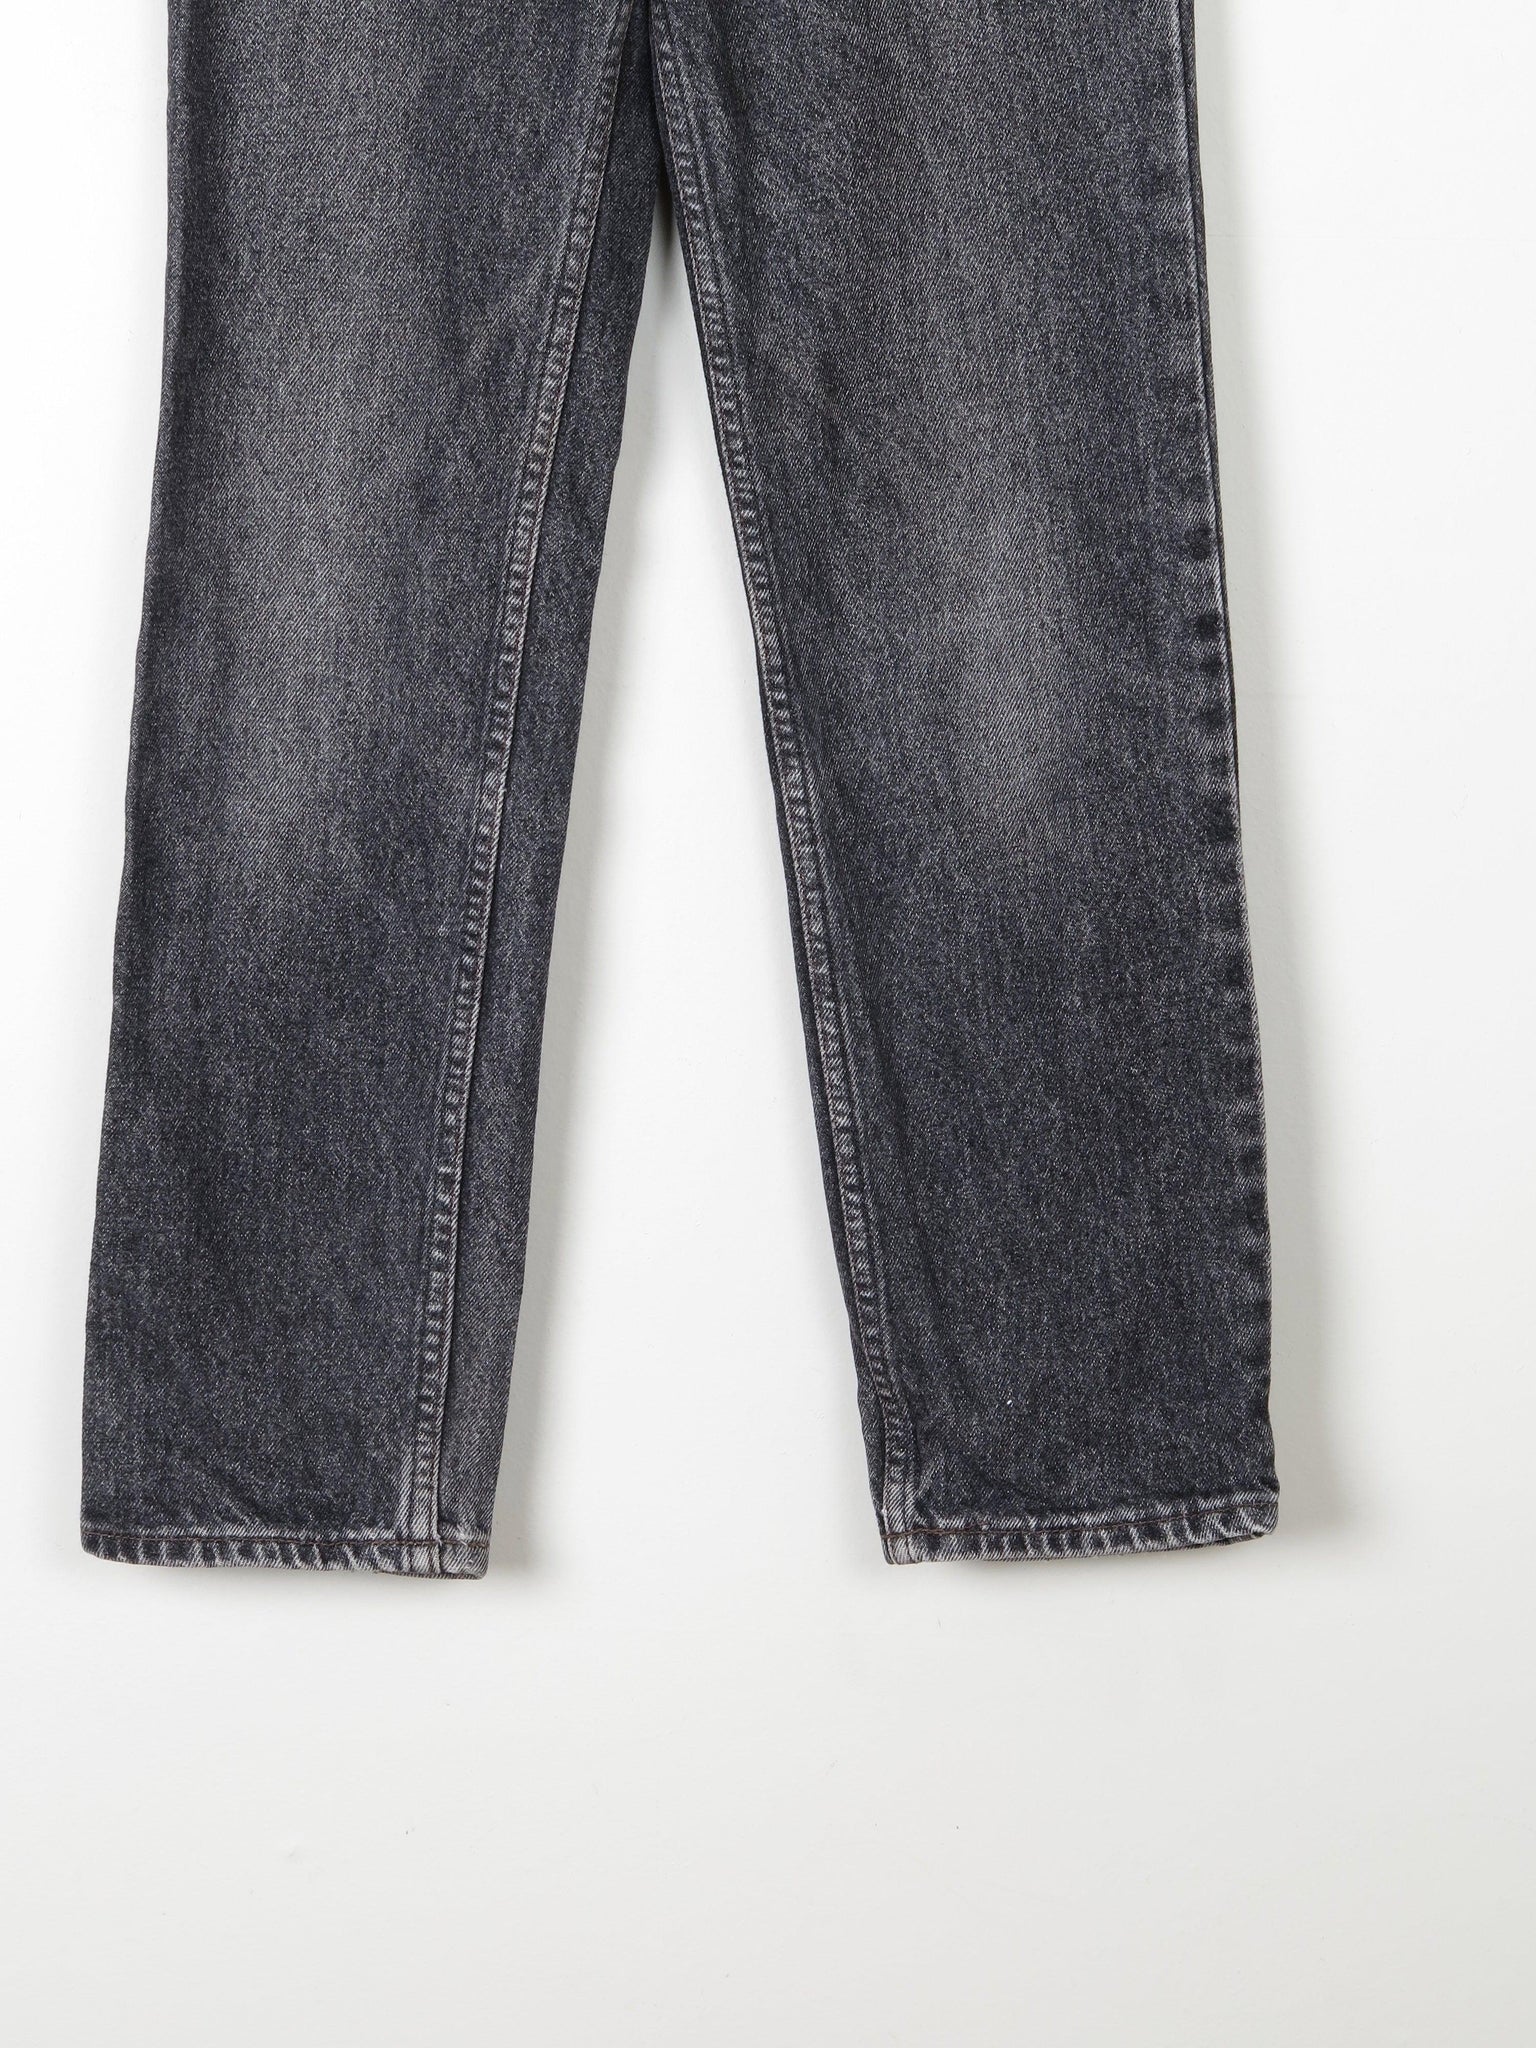 Charcoal Grey/Black Vintage Levis 631's 26" / 30" 6 Approx - The Harlequin